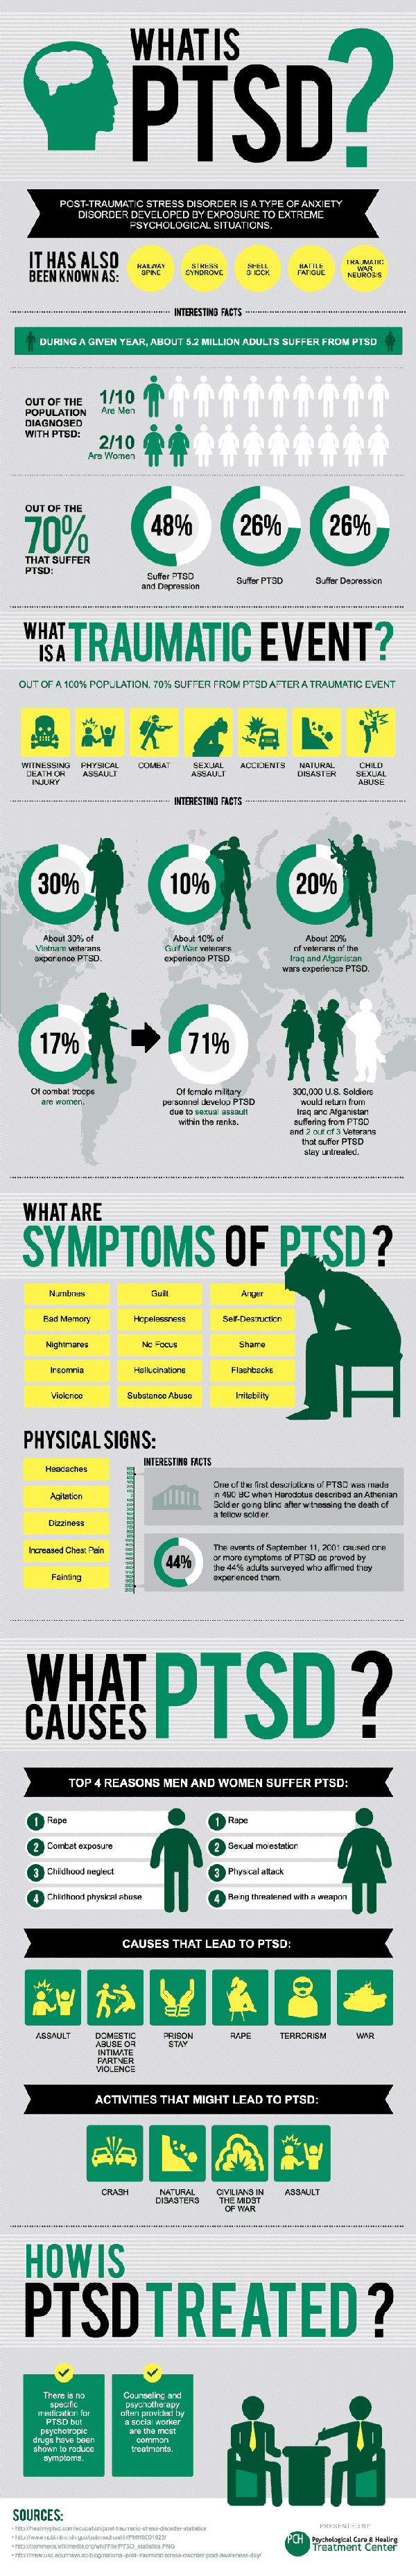 post-traumatic-stress-disorder-infographic